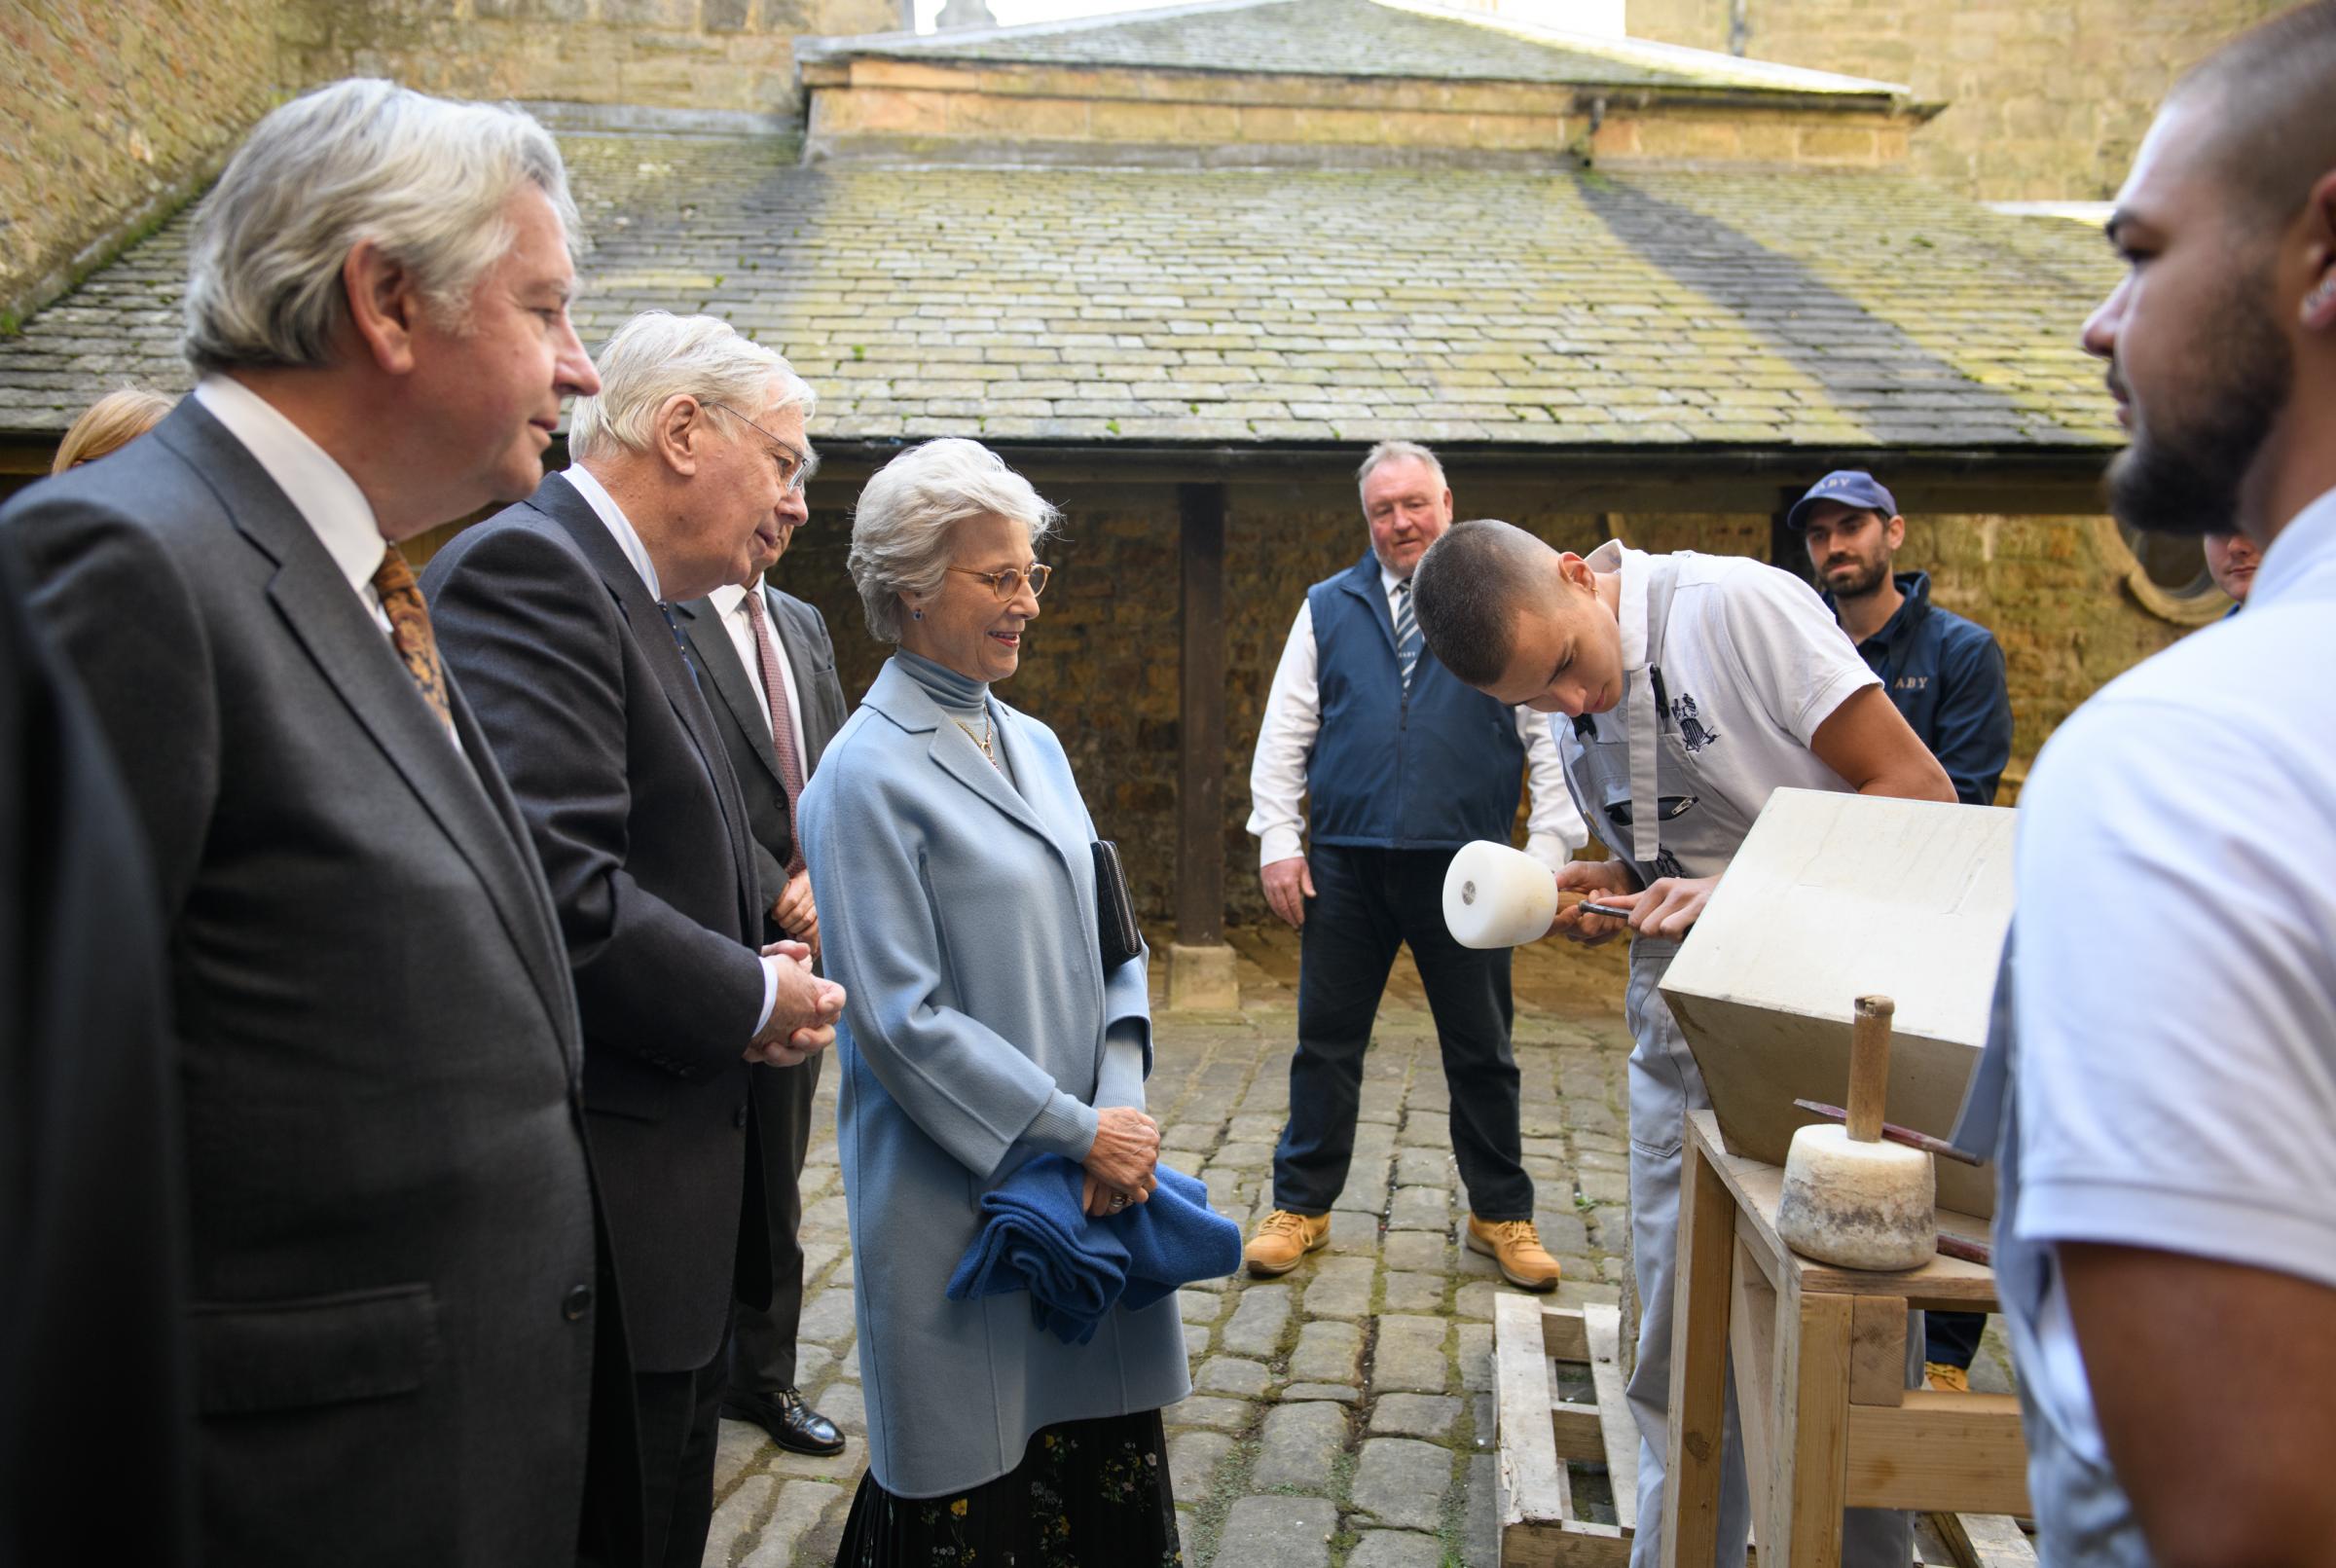 The Duke and Duchess of Gloucester visited Raby Castles RIsing project on Wednesday